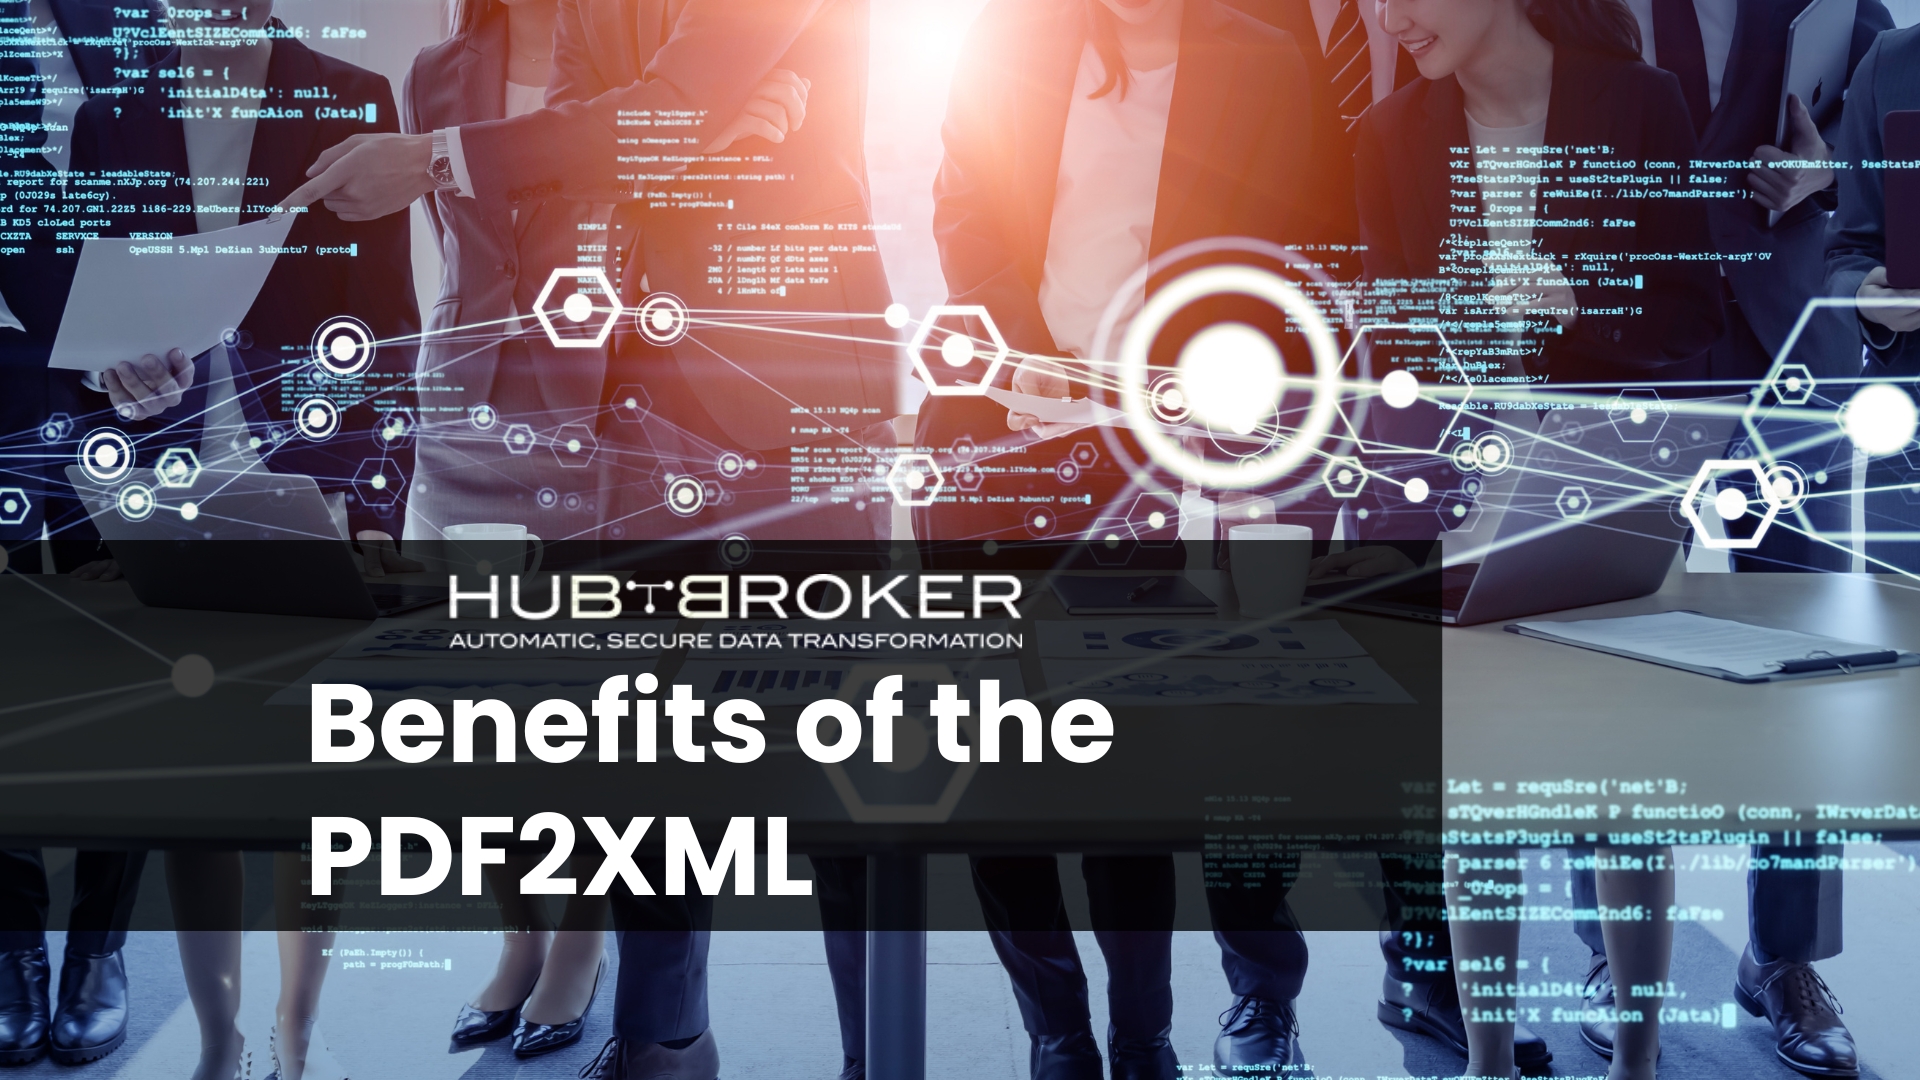 Positive Benefits of the PDF2XML with the HubBroker